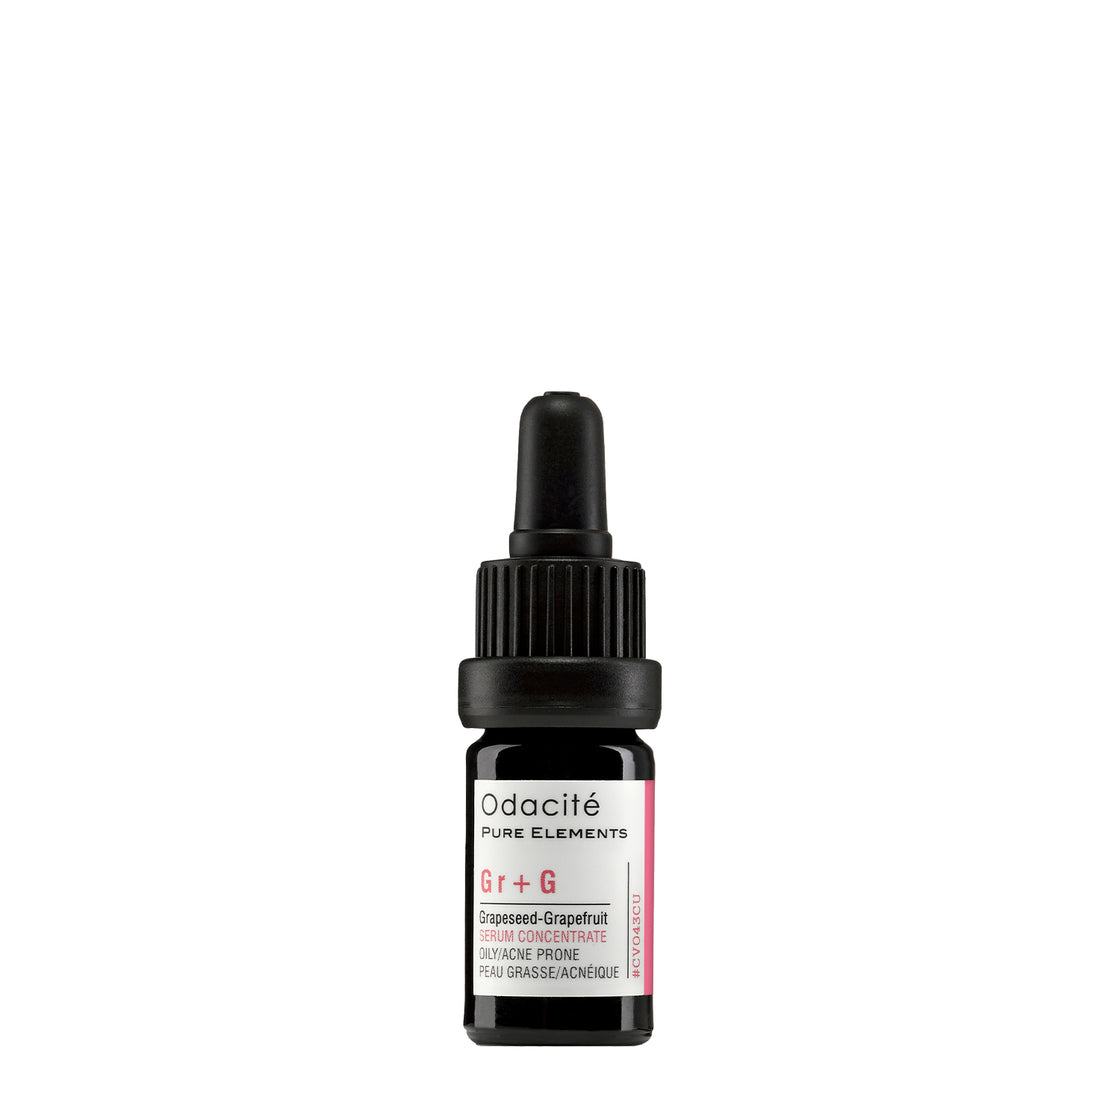 Grapeseed Grapefruit Serum Concentrate - Oily-Acne Prone